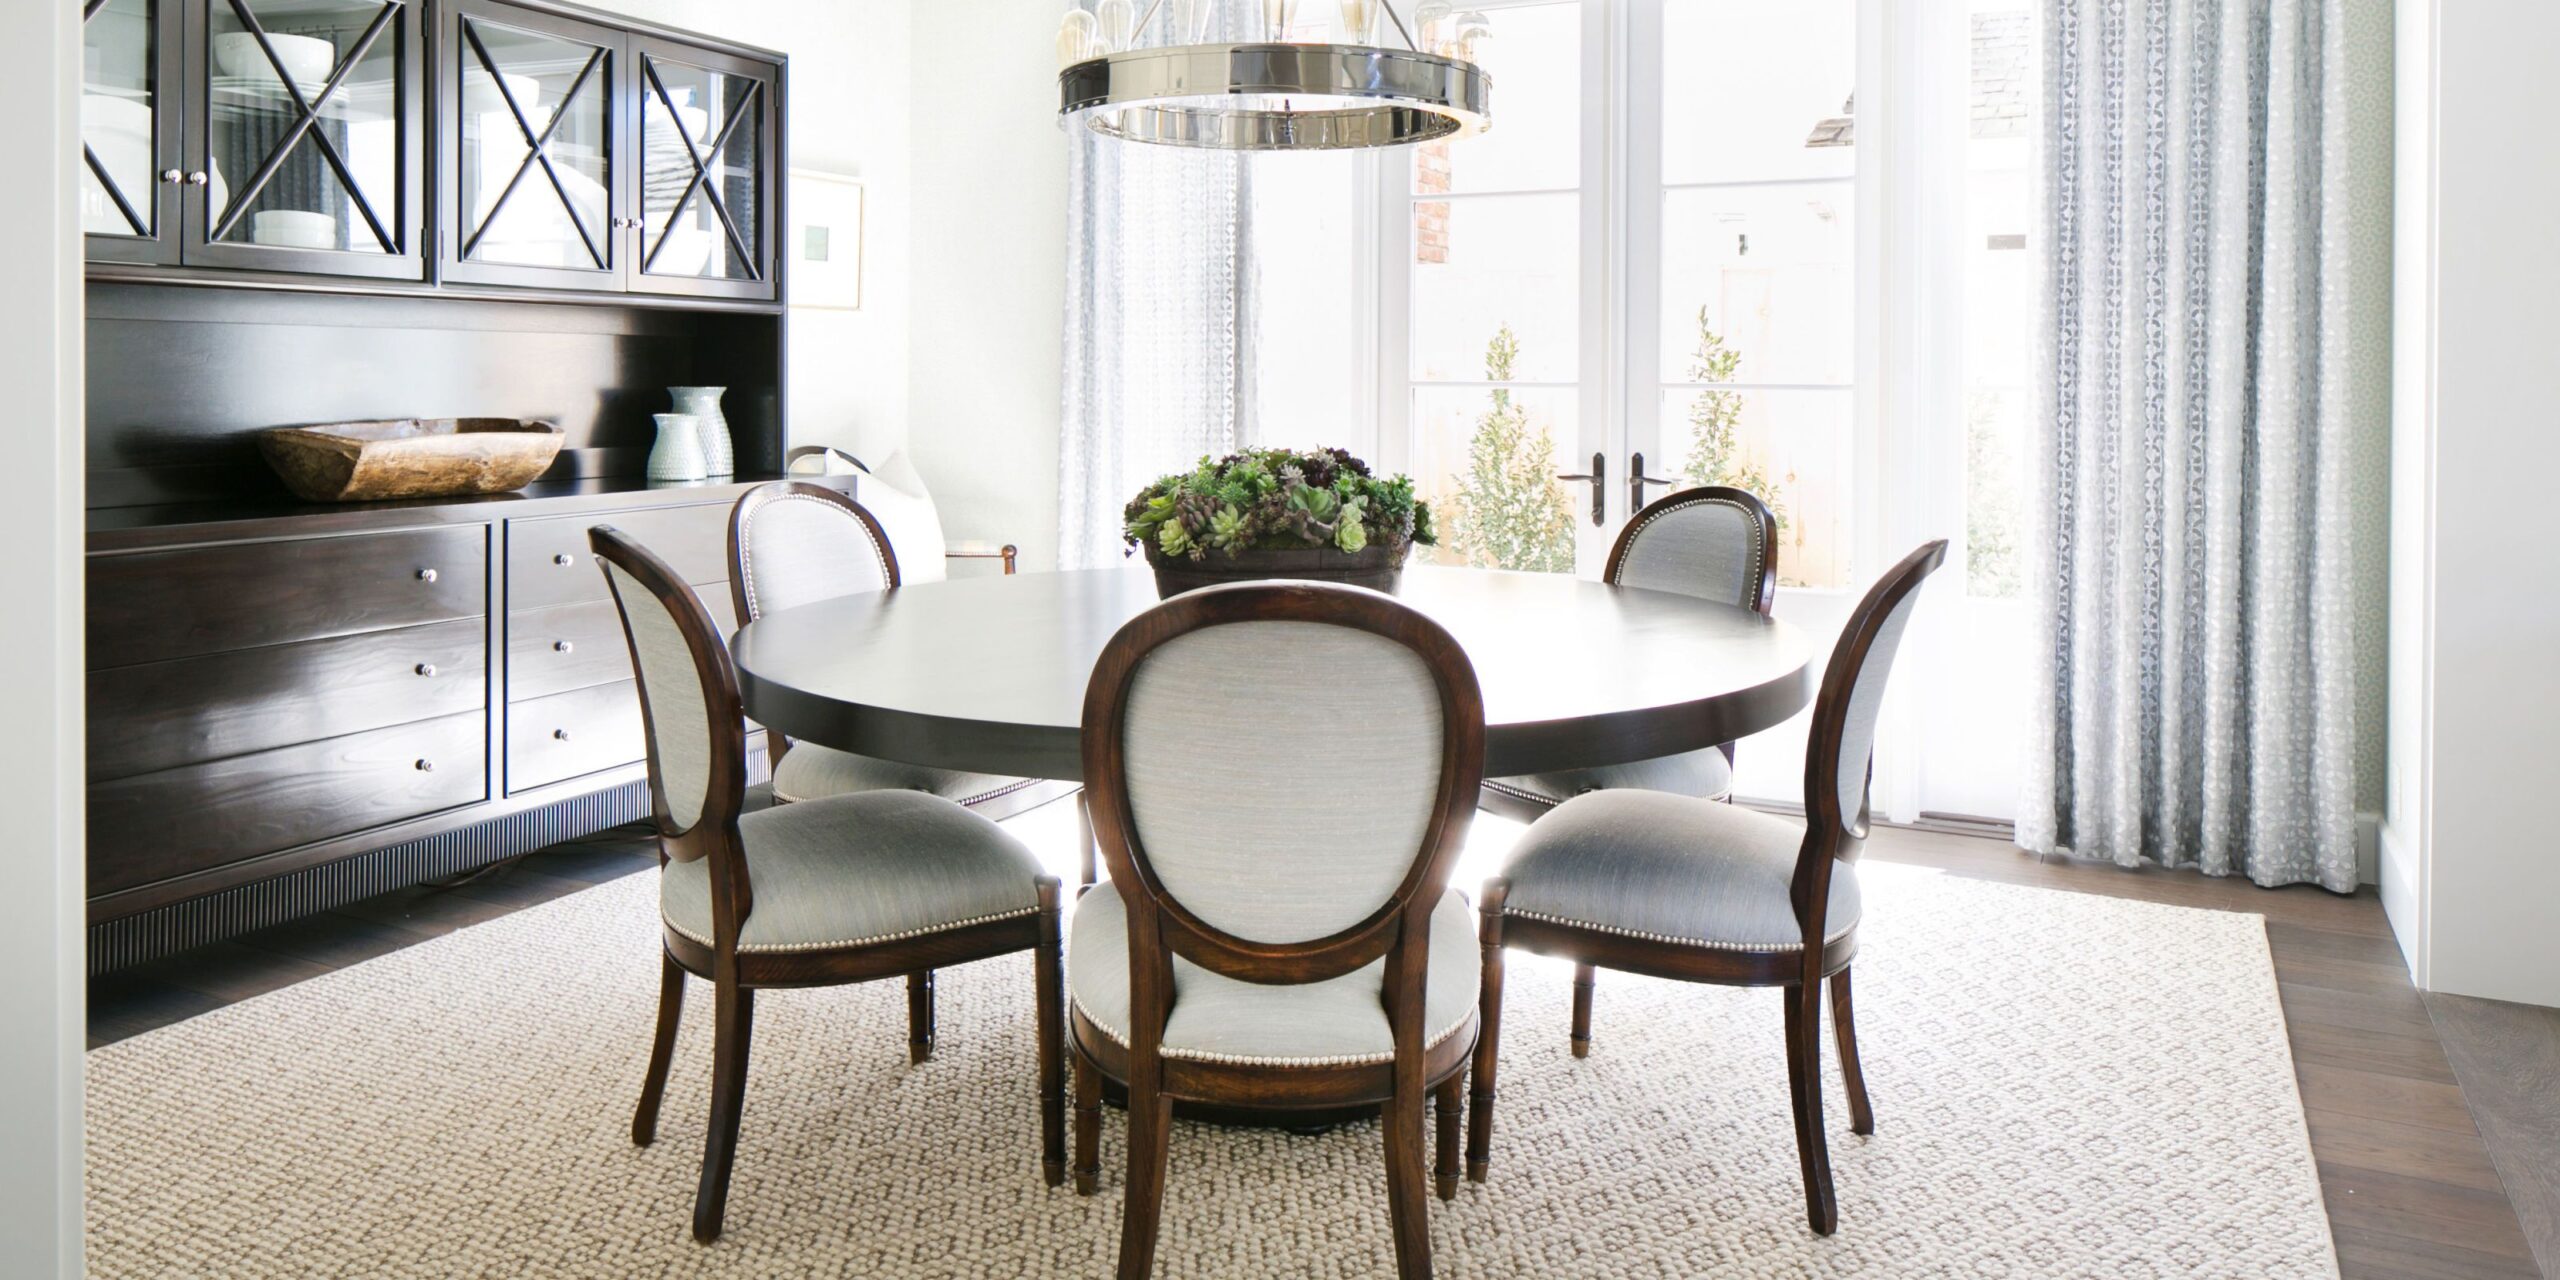 ROUND DINING ROOM TABLES, REASONS TO  CONSIDER THEM OVER OTHERS FOR HOUSES